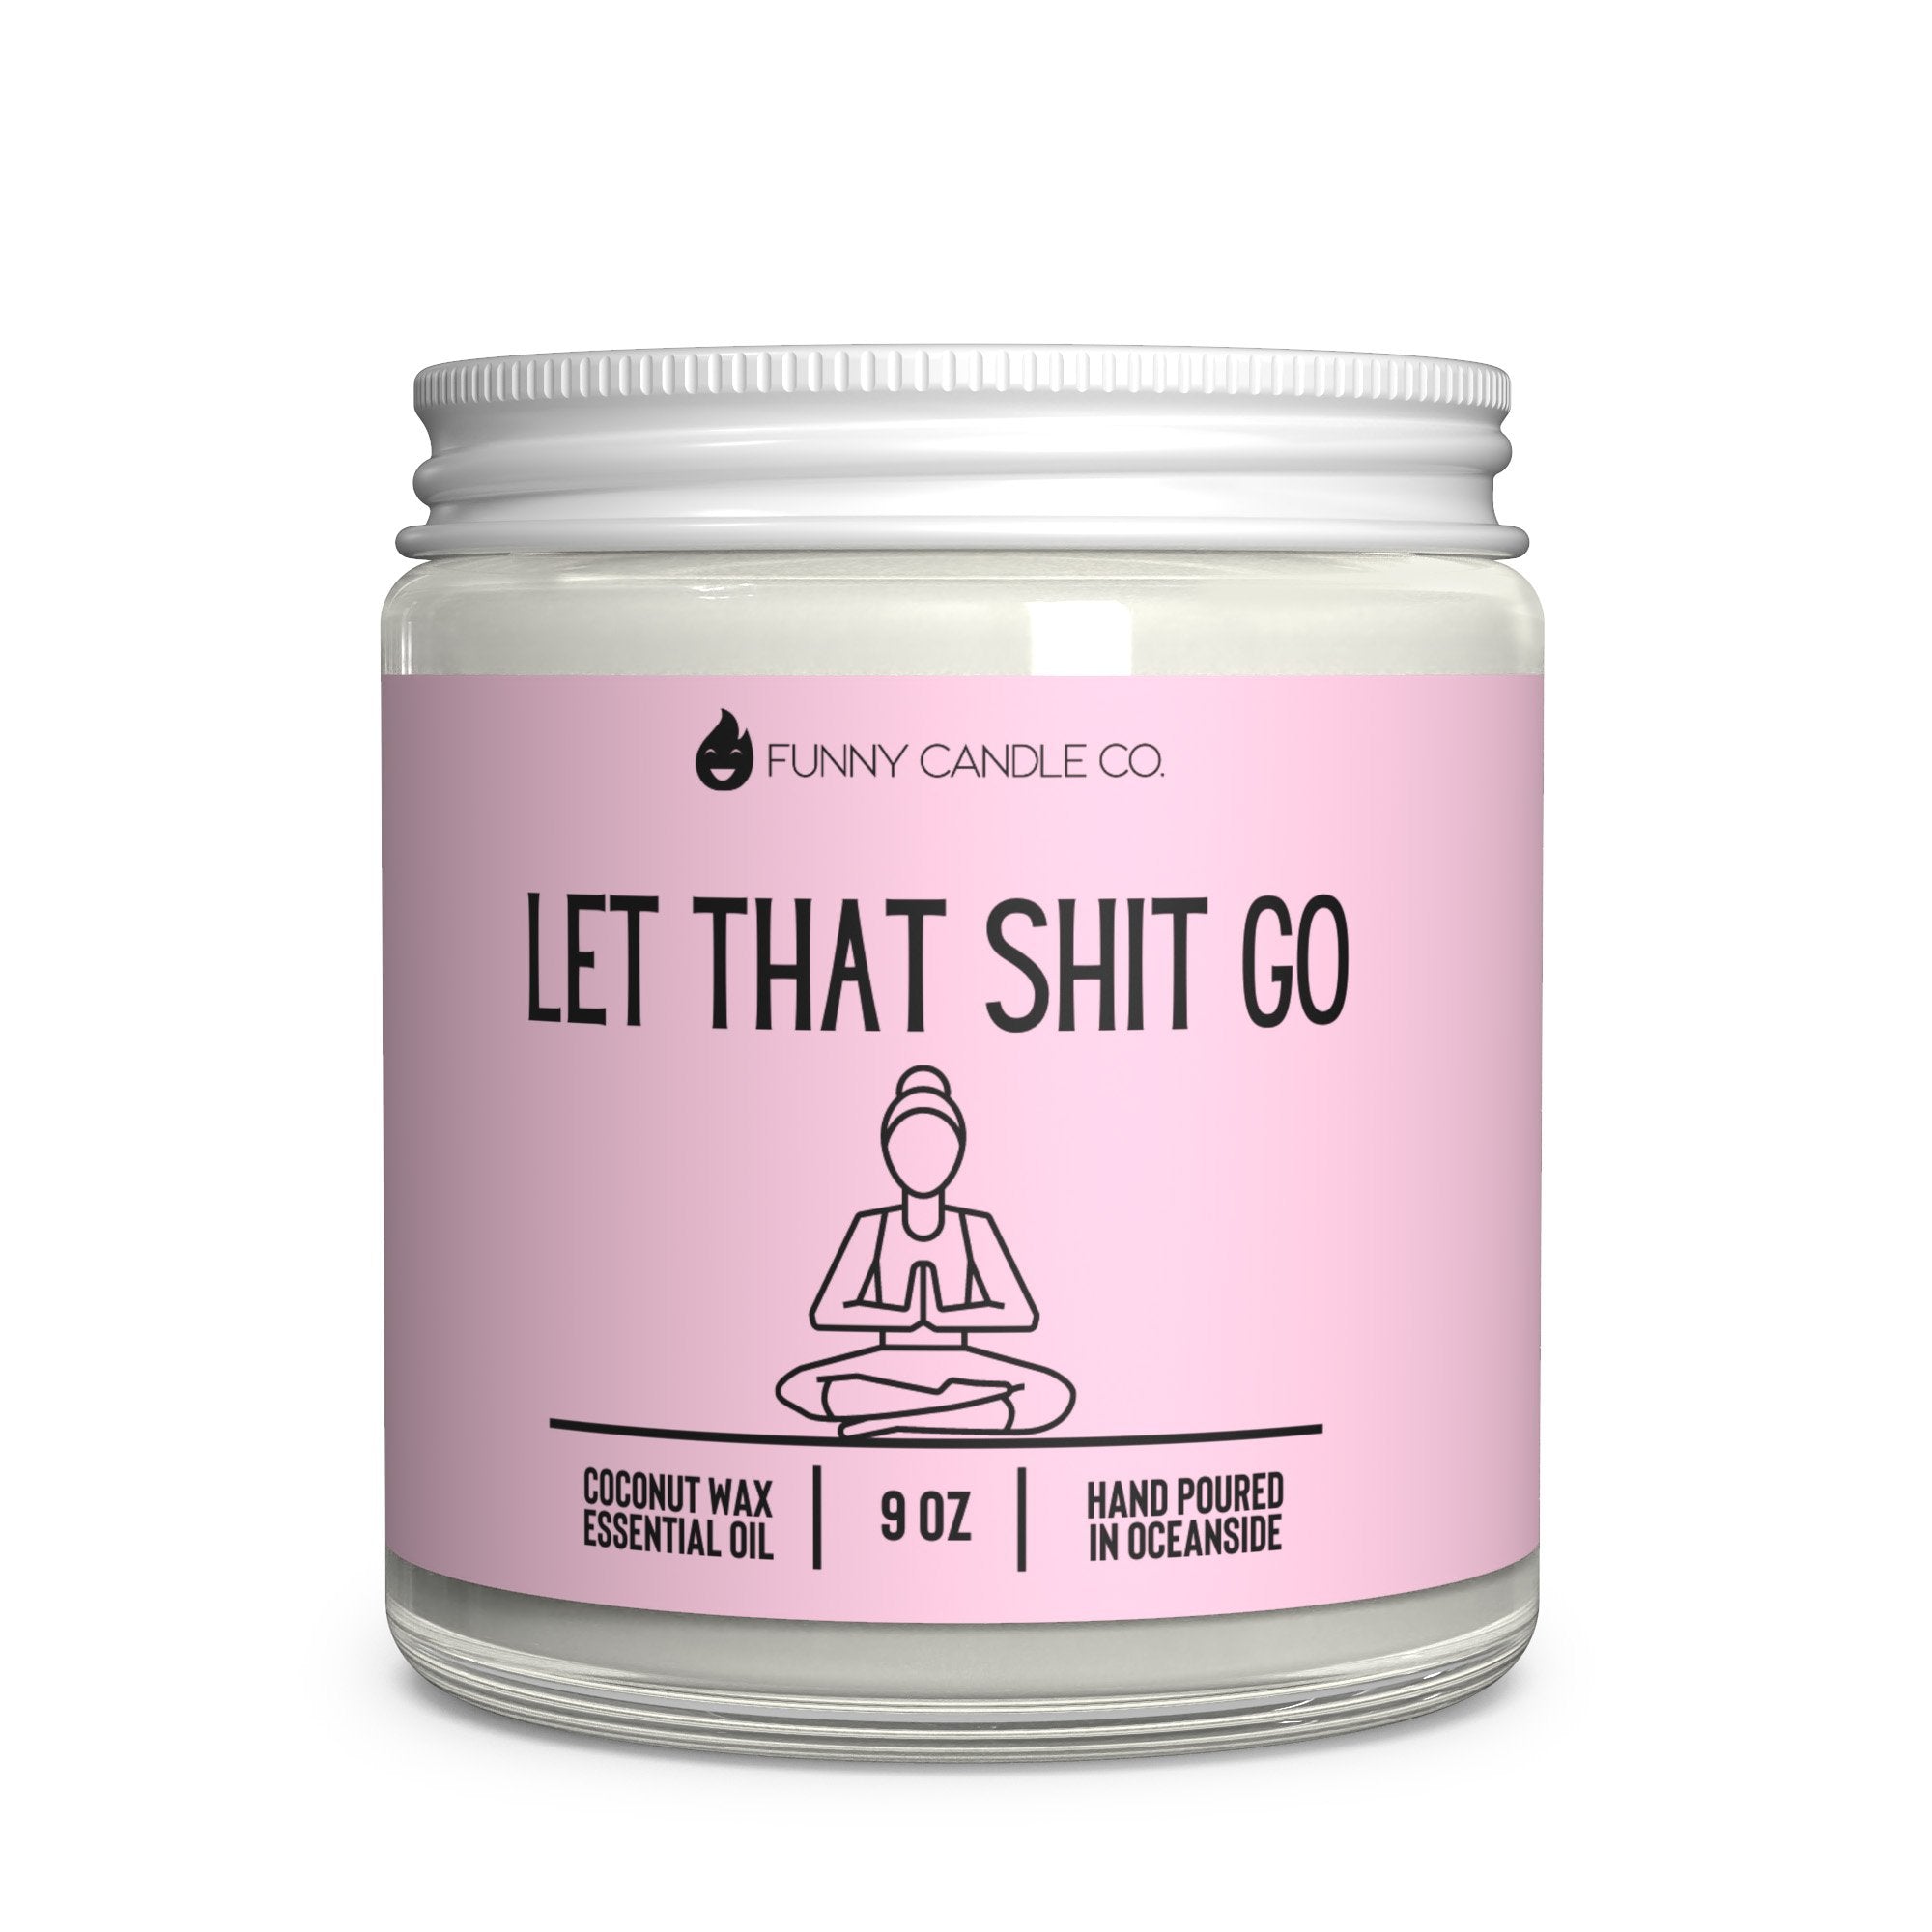 Let That S**t Go! - Candle